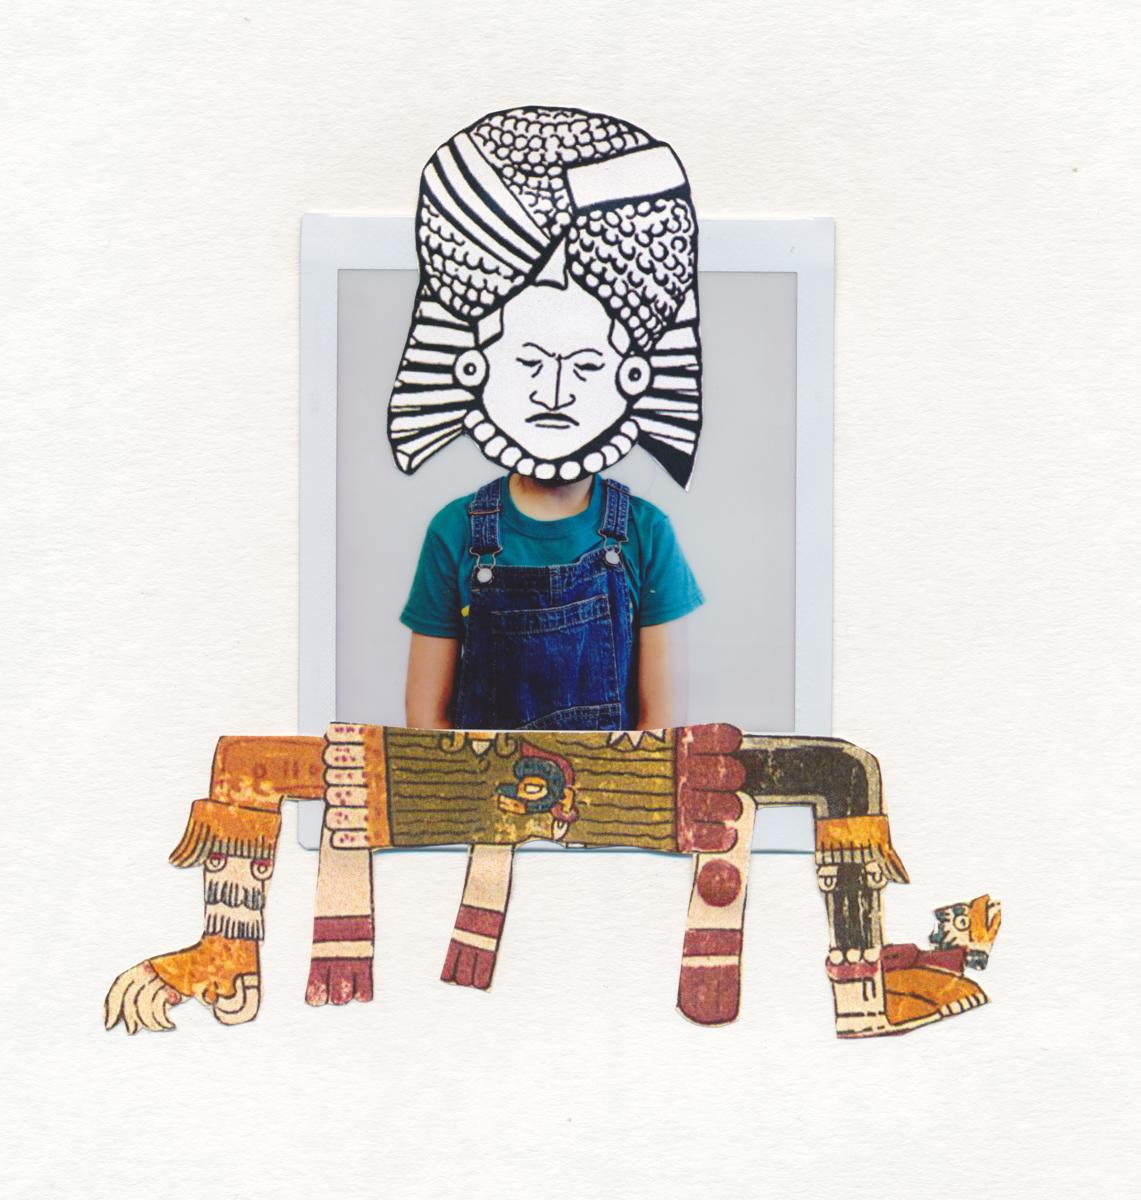 Photo of Dennis, a girl of Nahuatl origin born in Queens. The image is intervened with images extracted from pre-Hispanic codices alluding to the faces of the pre-Hispanic past of the culture and territory of Dennis's ancestors. Dennis is the first generation American - Indigenous - Nahuas born in Queens. “I am proud of my parents' culture,” says Dennis. Queens, 2019.